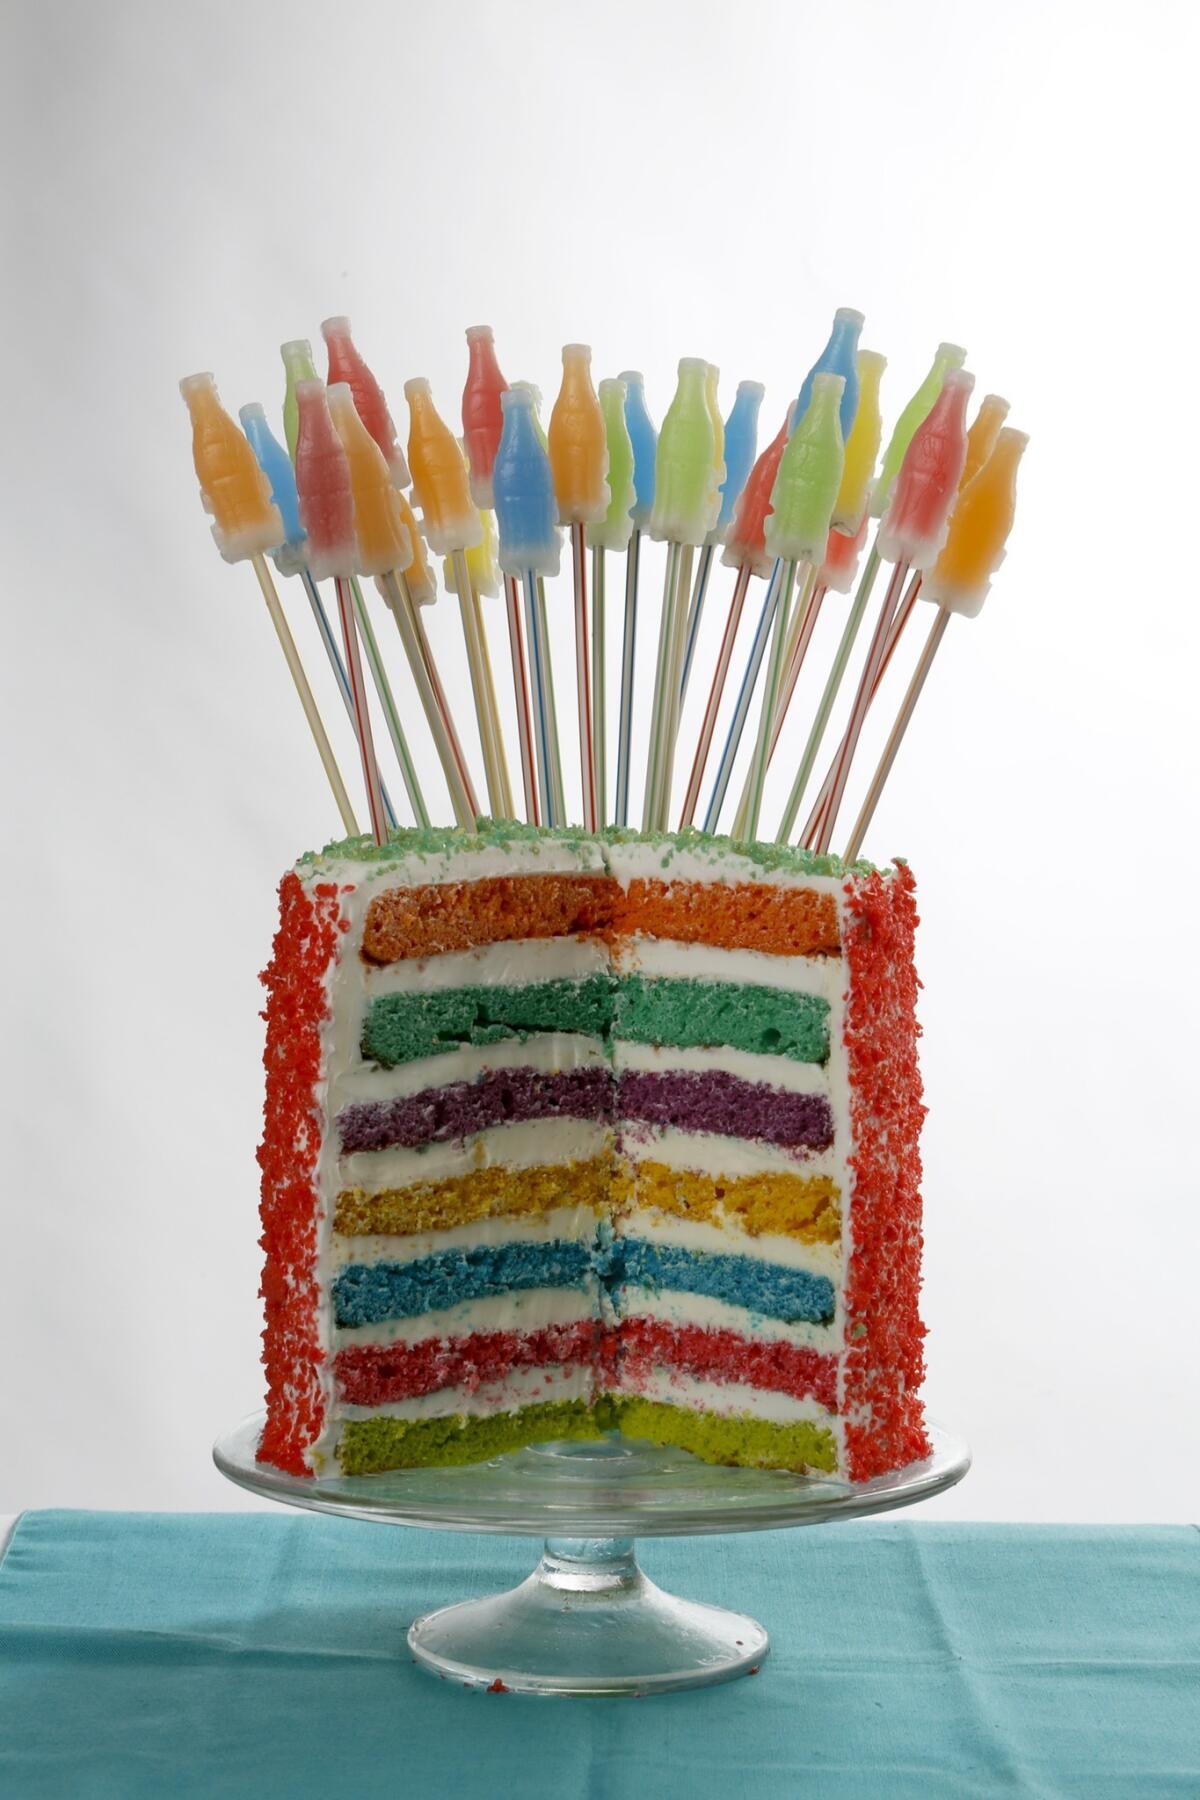 You can actually hear popping from the Seven-Layer Soda Pop Rocks Cake as the candies react with the icing. Recipe: Seven-Layer Soda Pop Rocks Cake